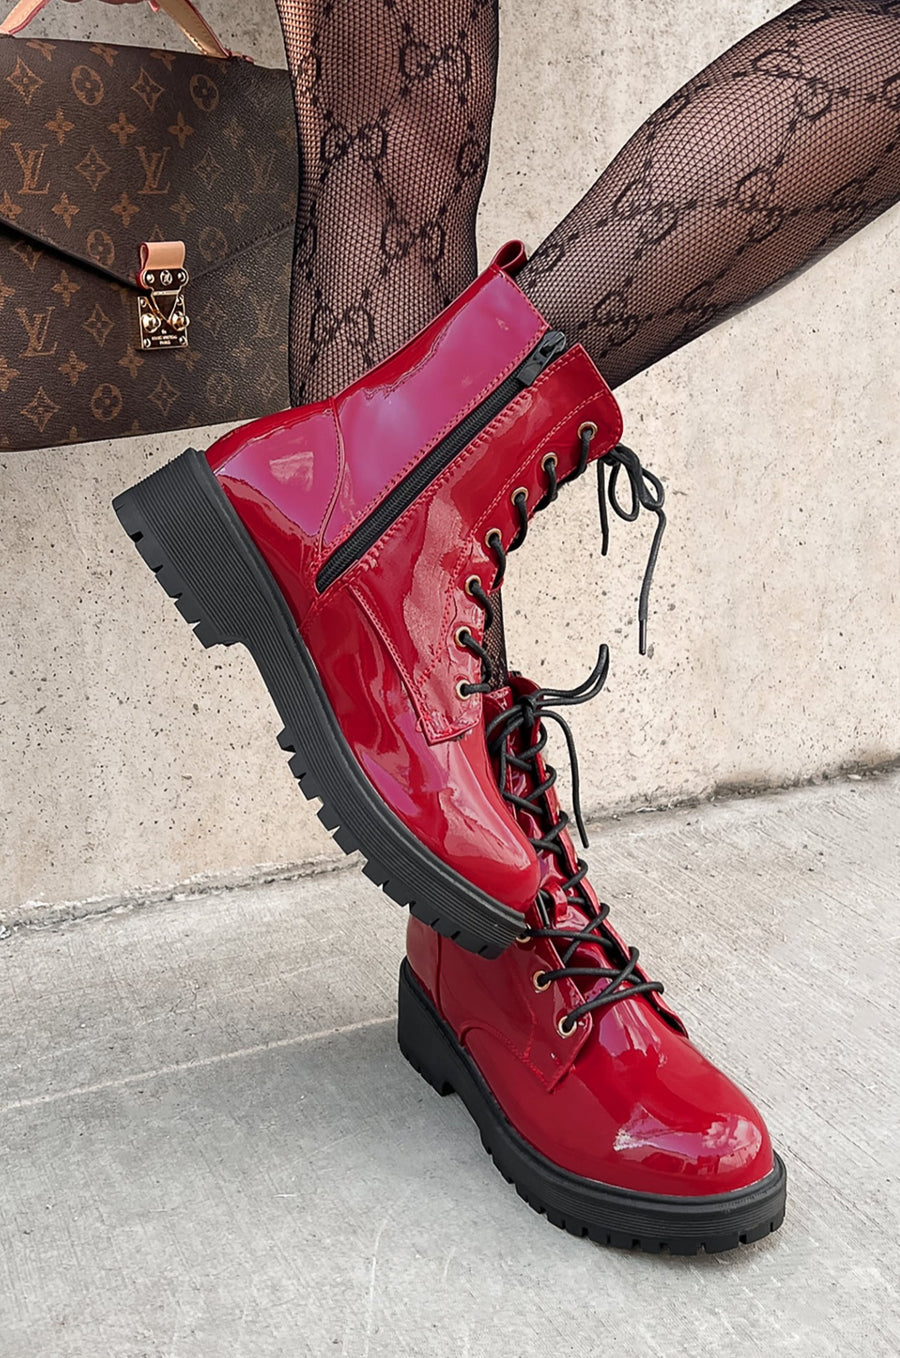 Doorbuster Lennox Patent Leather Combat Boots (Red Patent) - NanaMacs